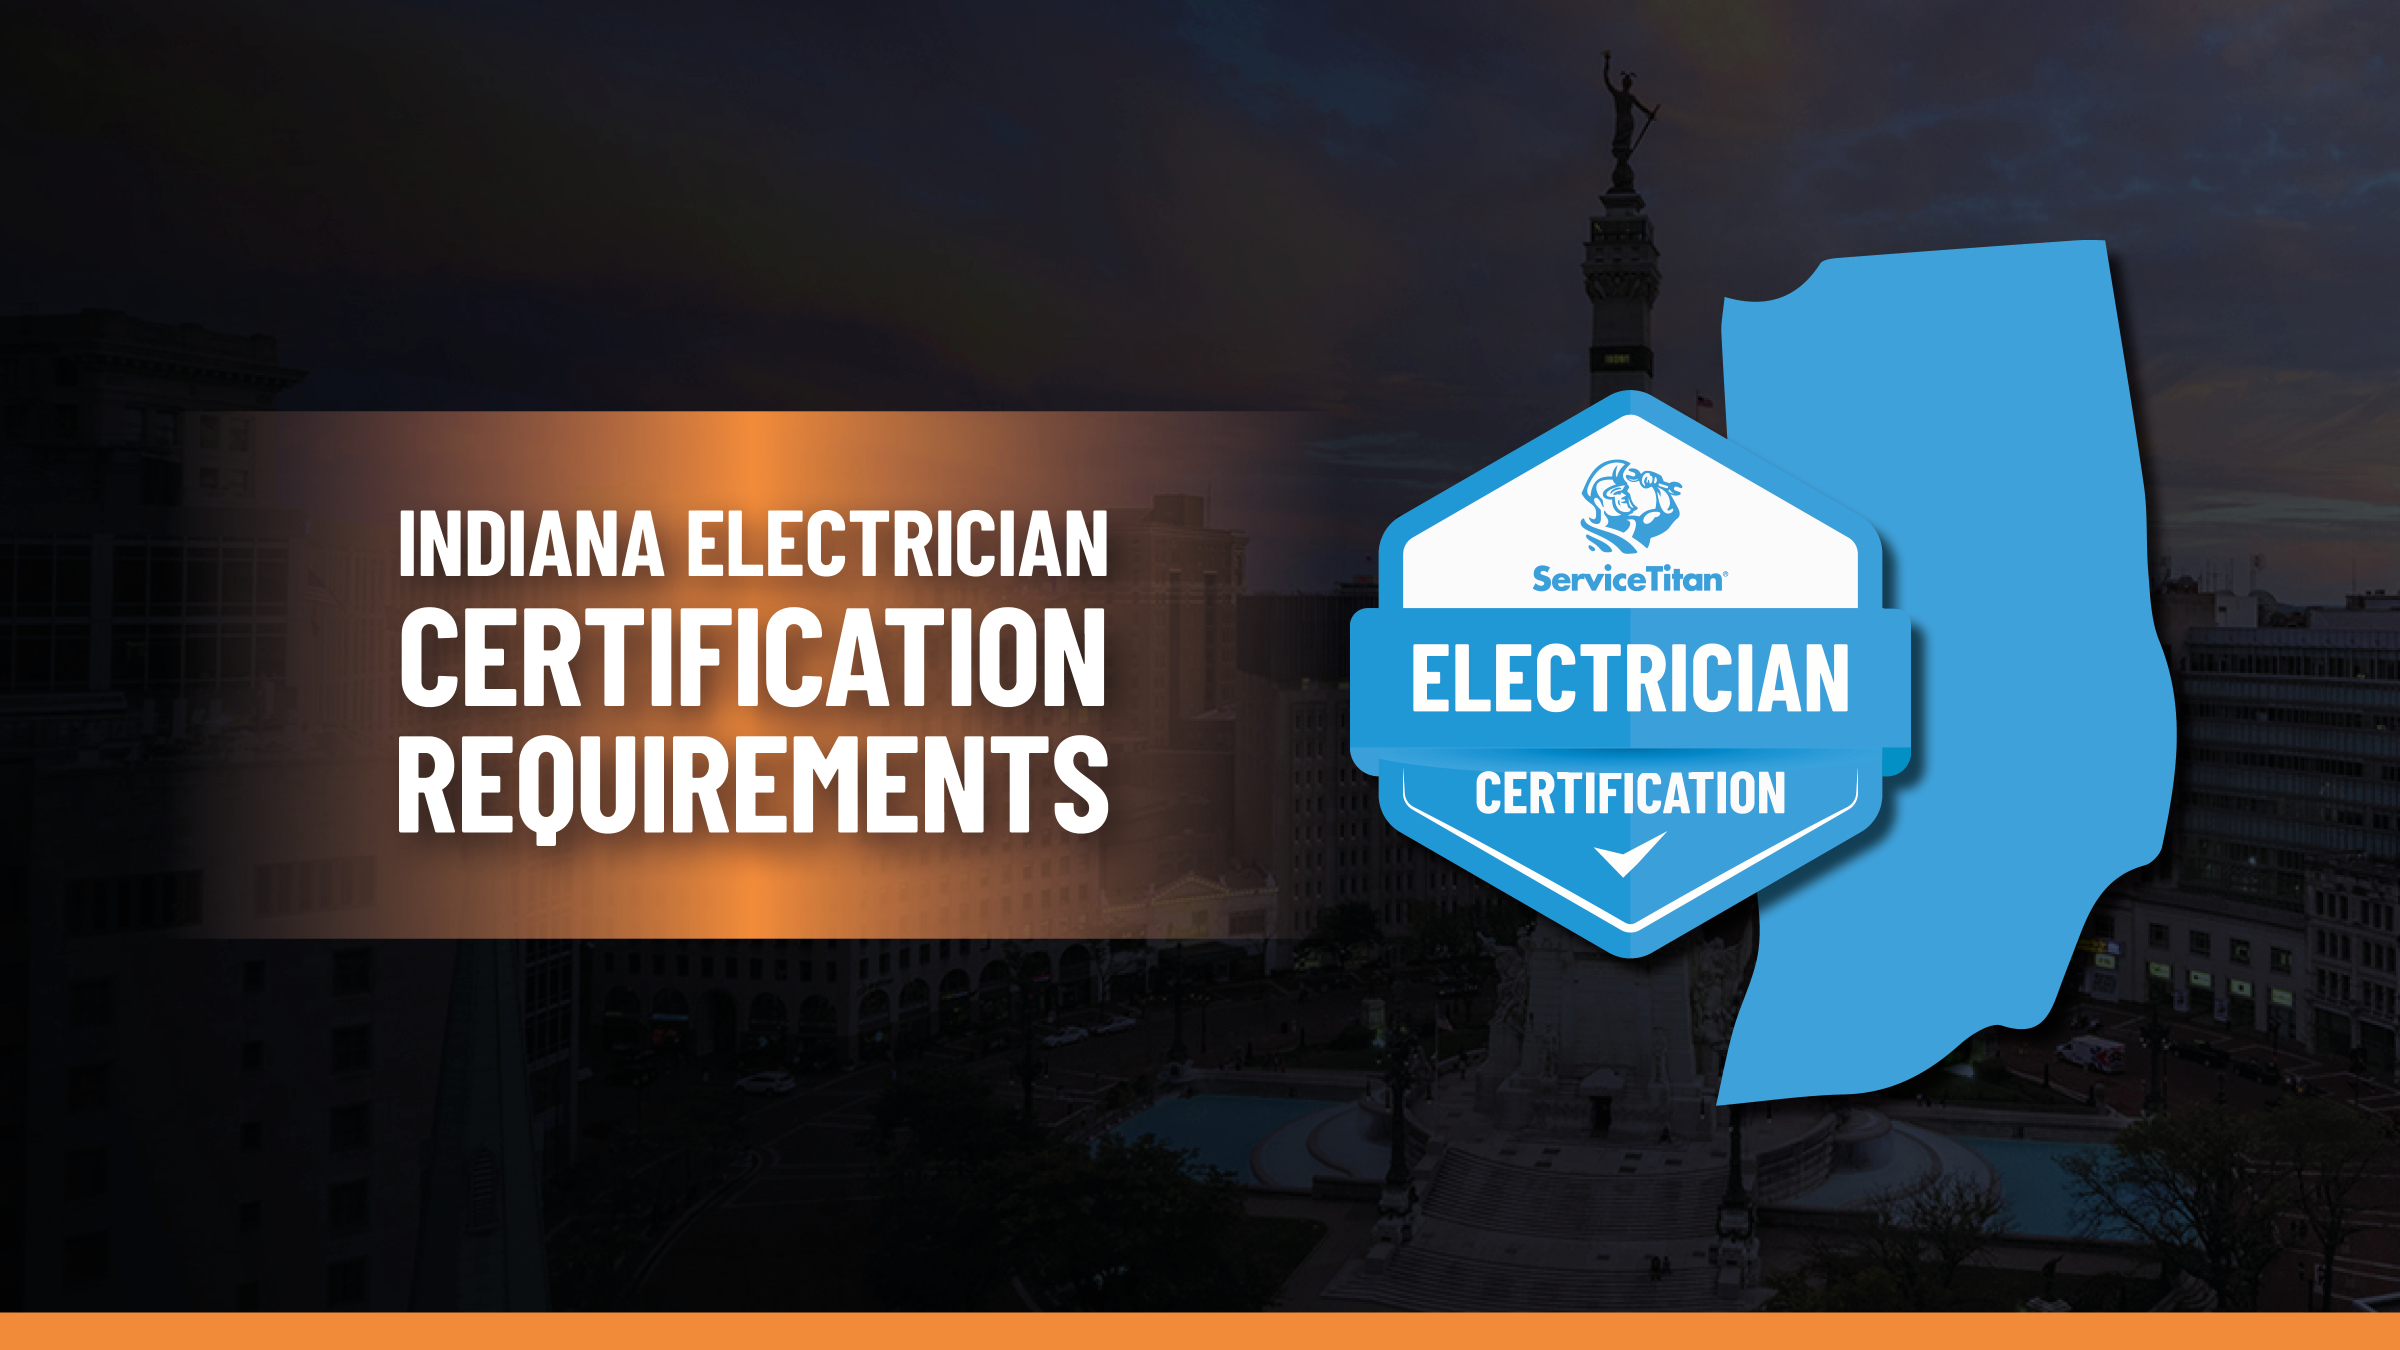 Indiana Electrical License How to an Electrician in Indiana